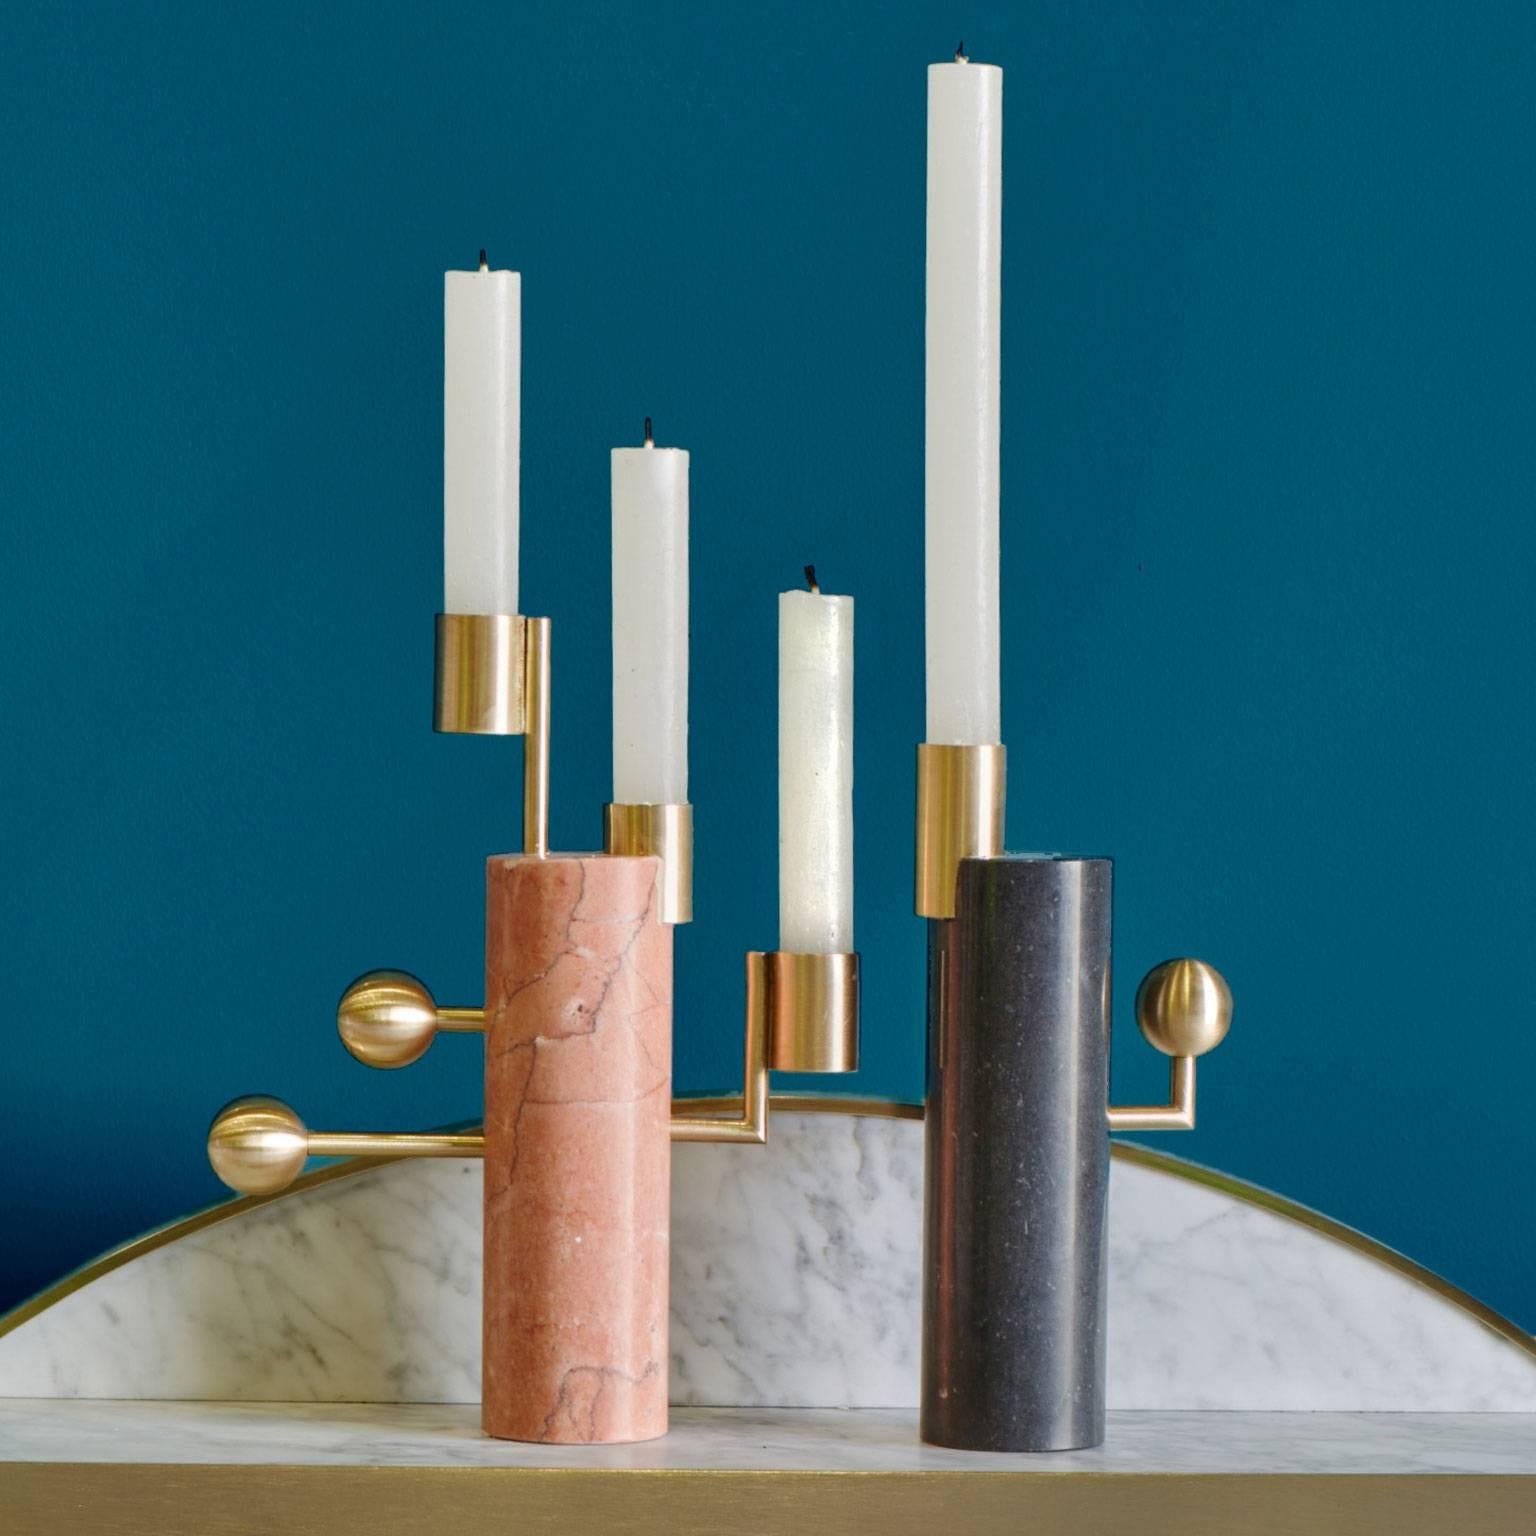 Contemporary Lara Bohinc, Stargazer Candleholder in Nero Marquina Marble and Brass, In Stock